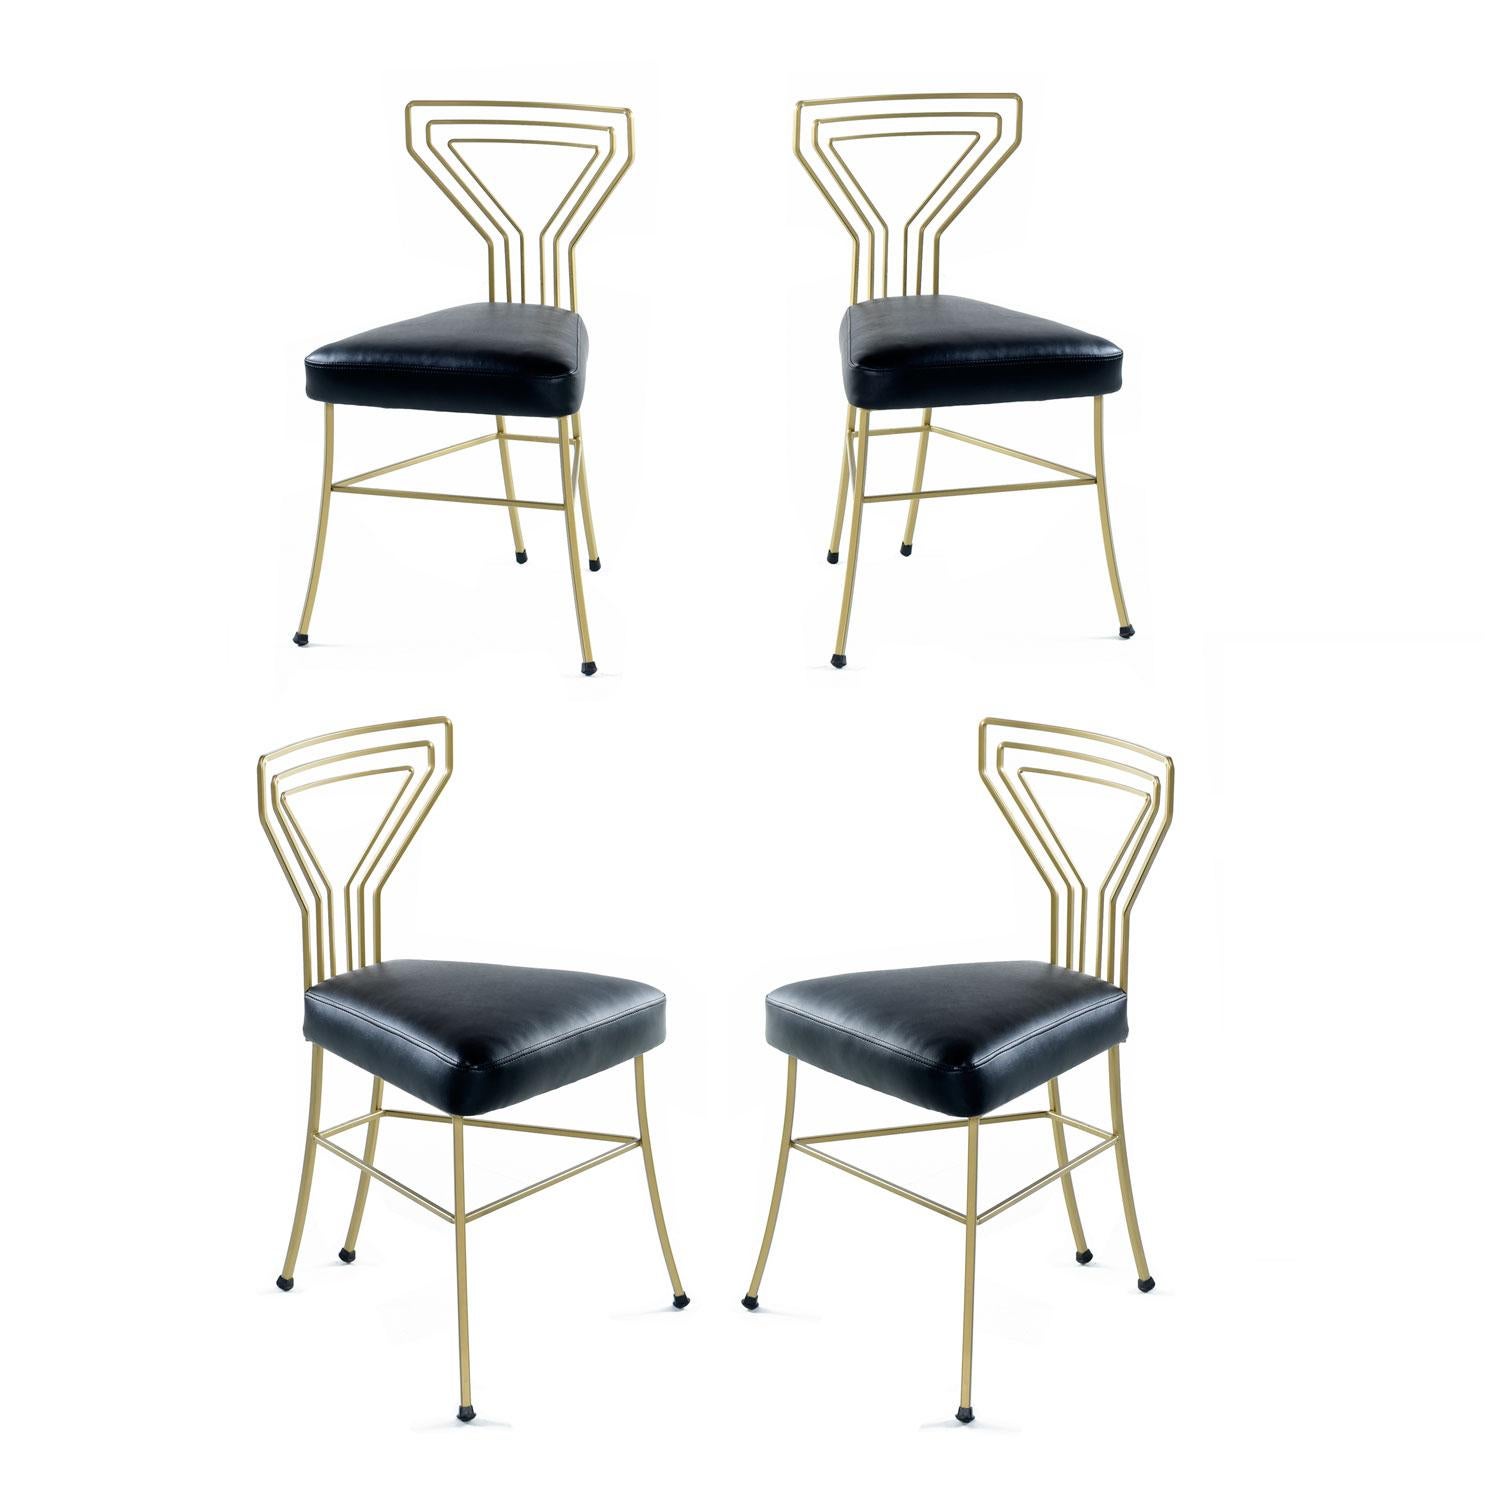 Art Deco, Hollywood Regency and Mid-Century Modern design elements have combined to create what is arguably the most sublime patio dinette set ever. Gilt gold and black glam of this caliber transcends trends. Steeped in mystery, we have no idea who